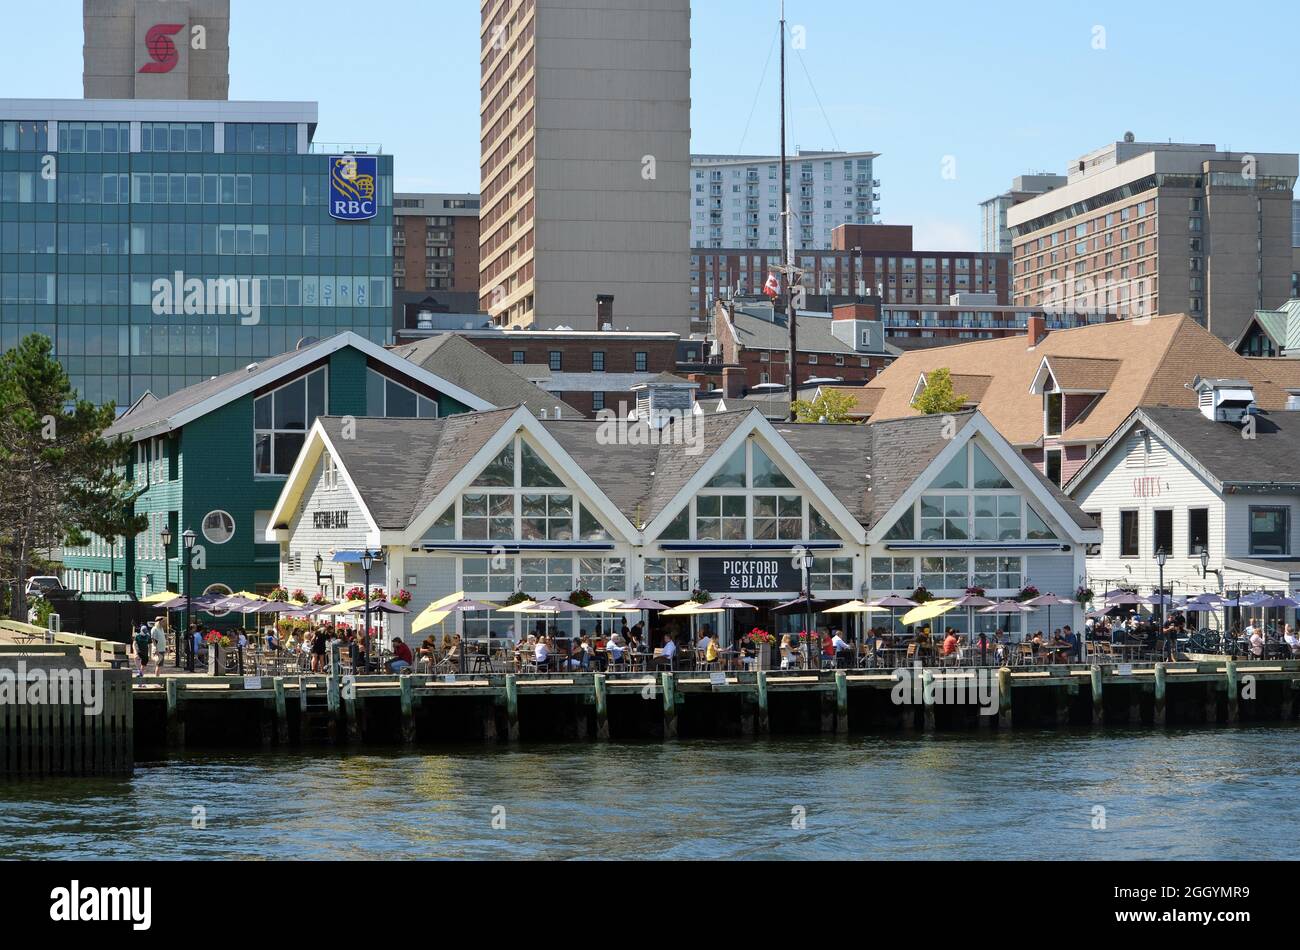 Pickford and Black restaurant on the waterfront of Halifax, Nova Scotia, Canada Stock Photo